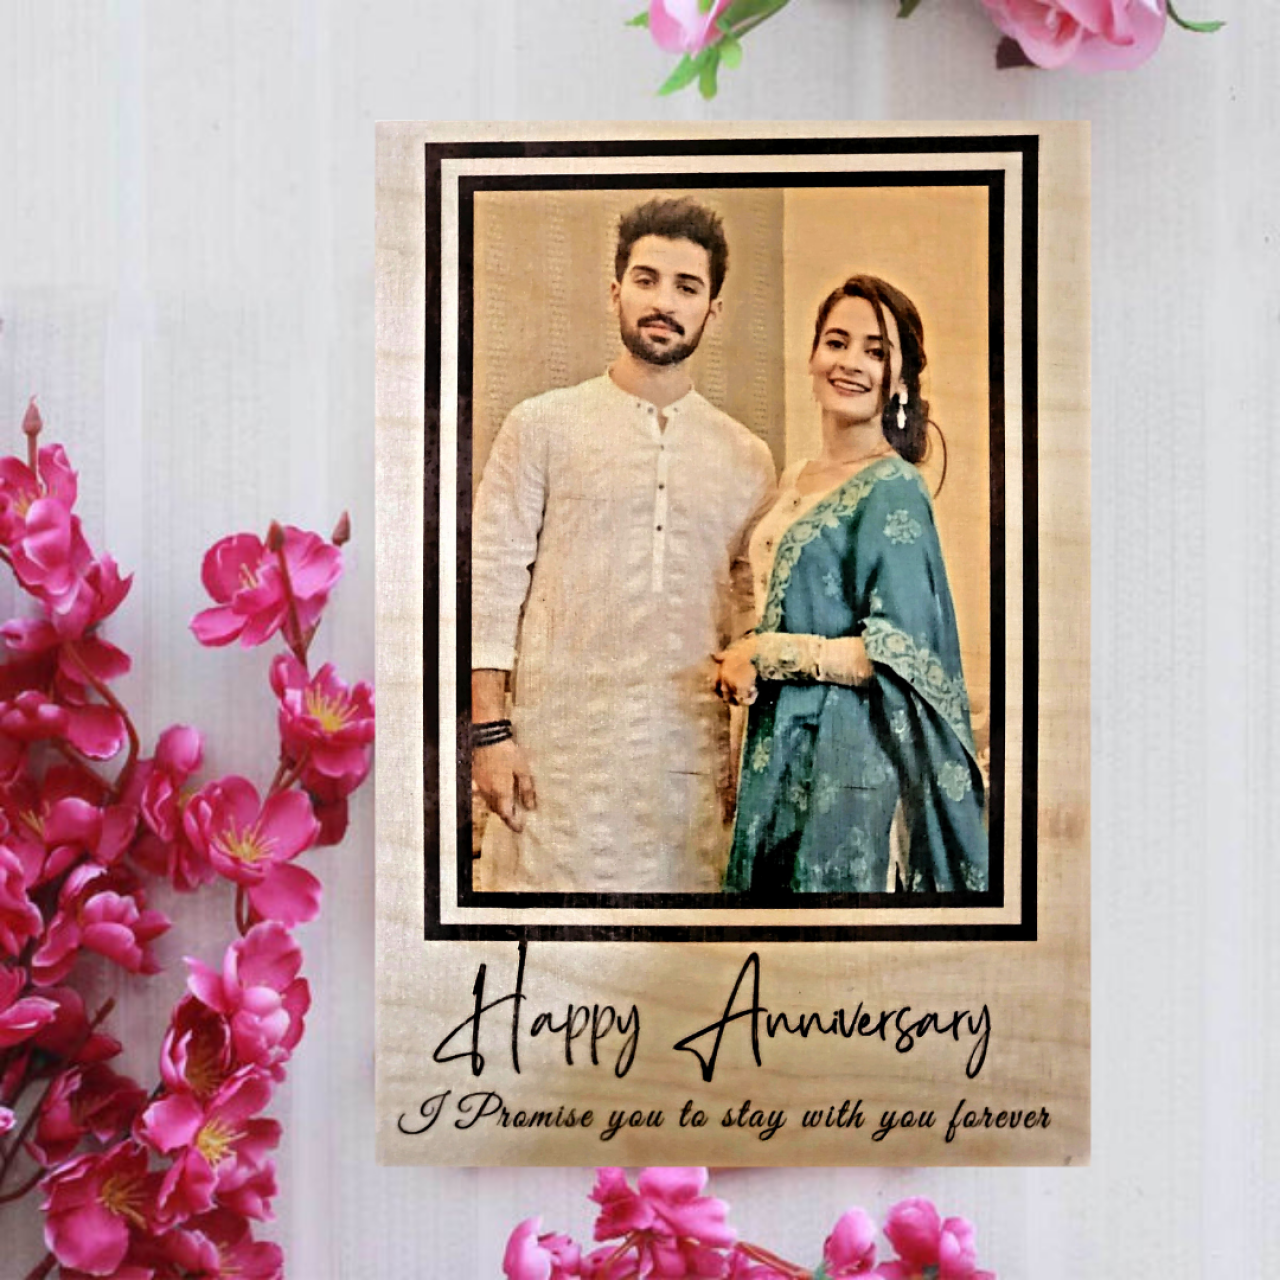 Personalized Anniversary UV Printed Wooden Frame Design 2